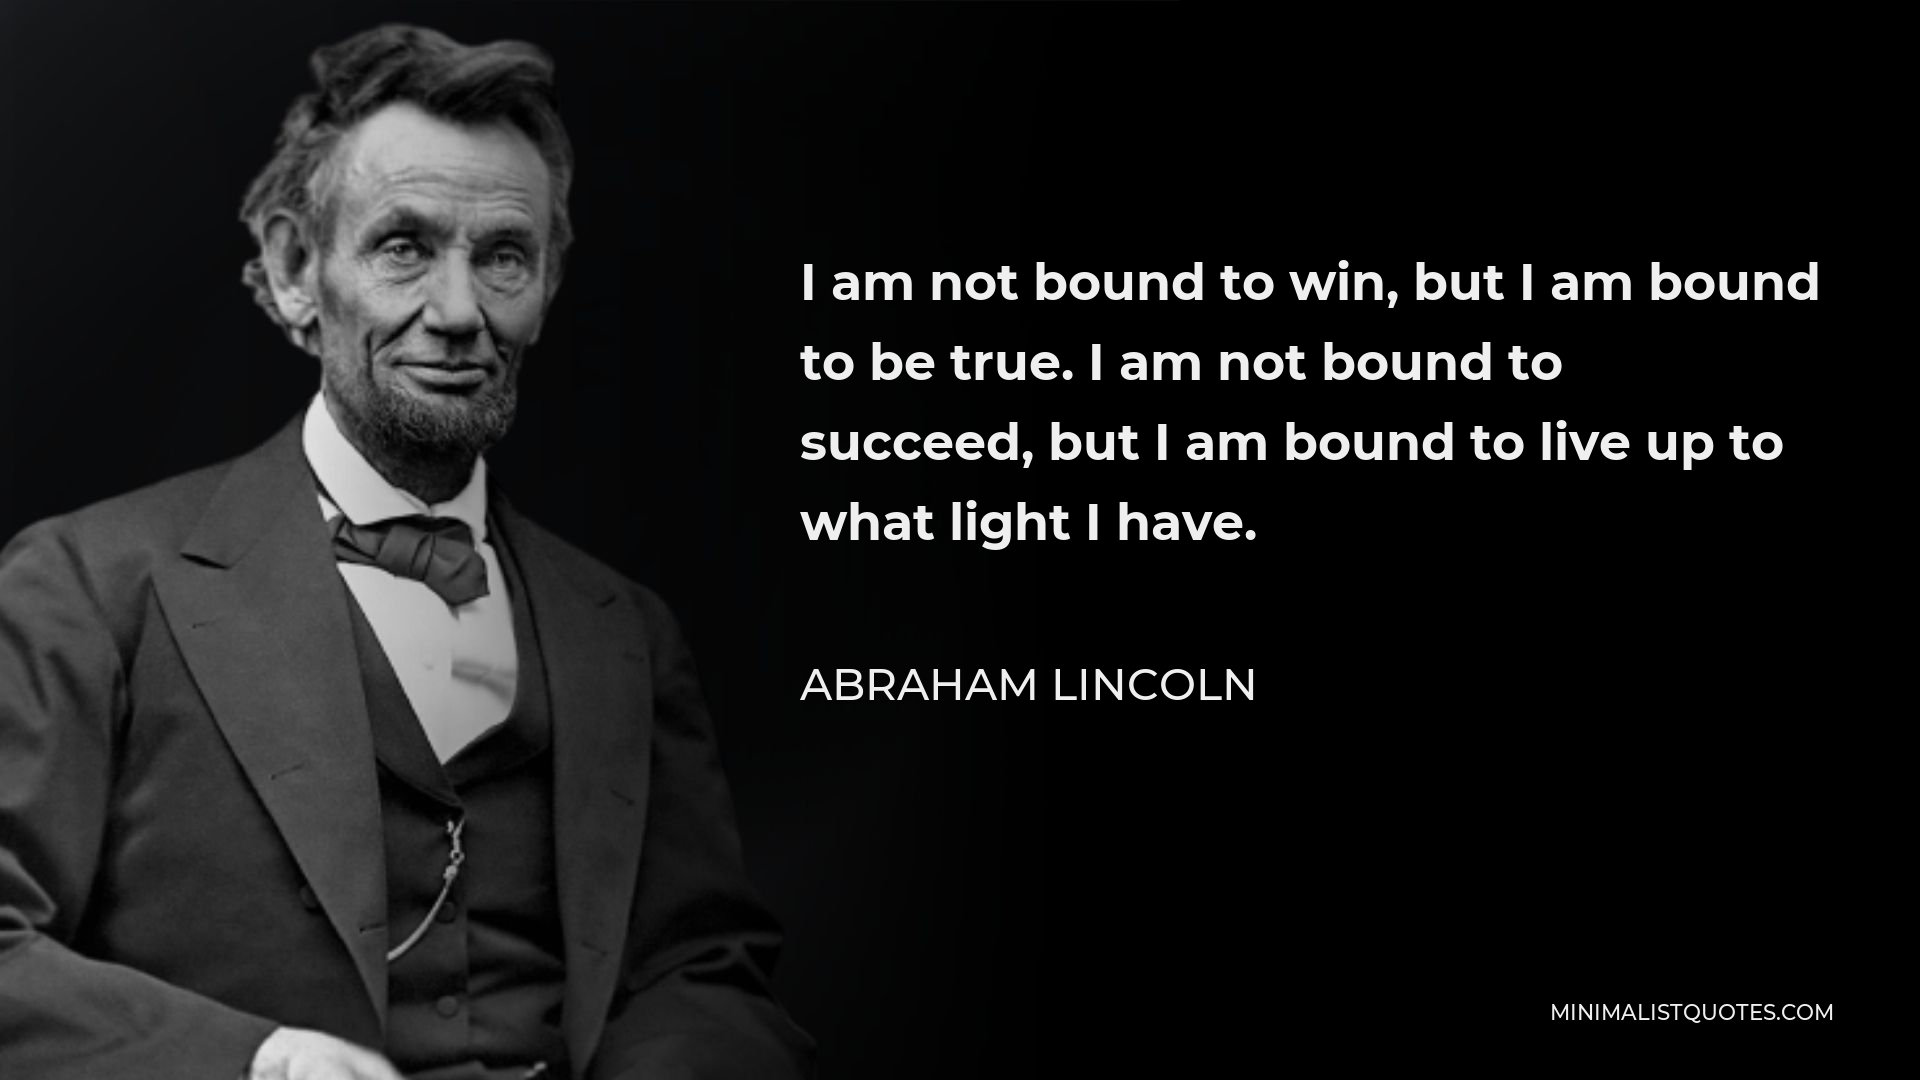 Abraham Lincoln Quote - I am not bound to win, but I am bound to be true. I am not bound to succeed, but I am bound to live up to what light I have.